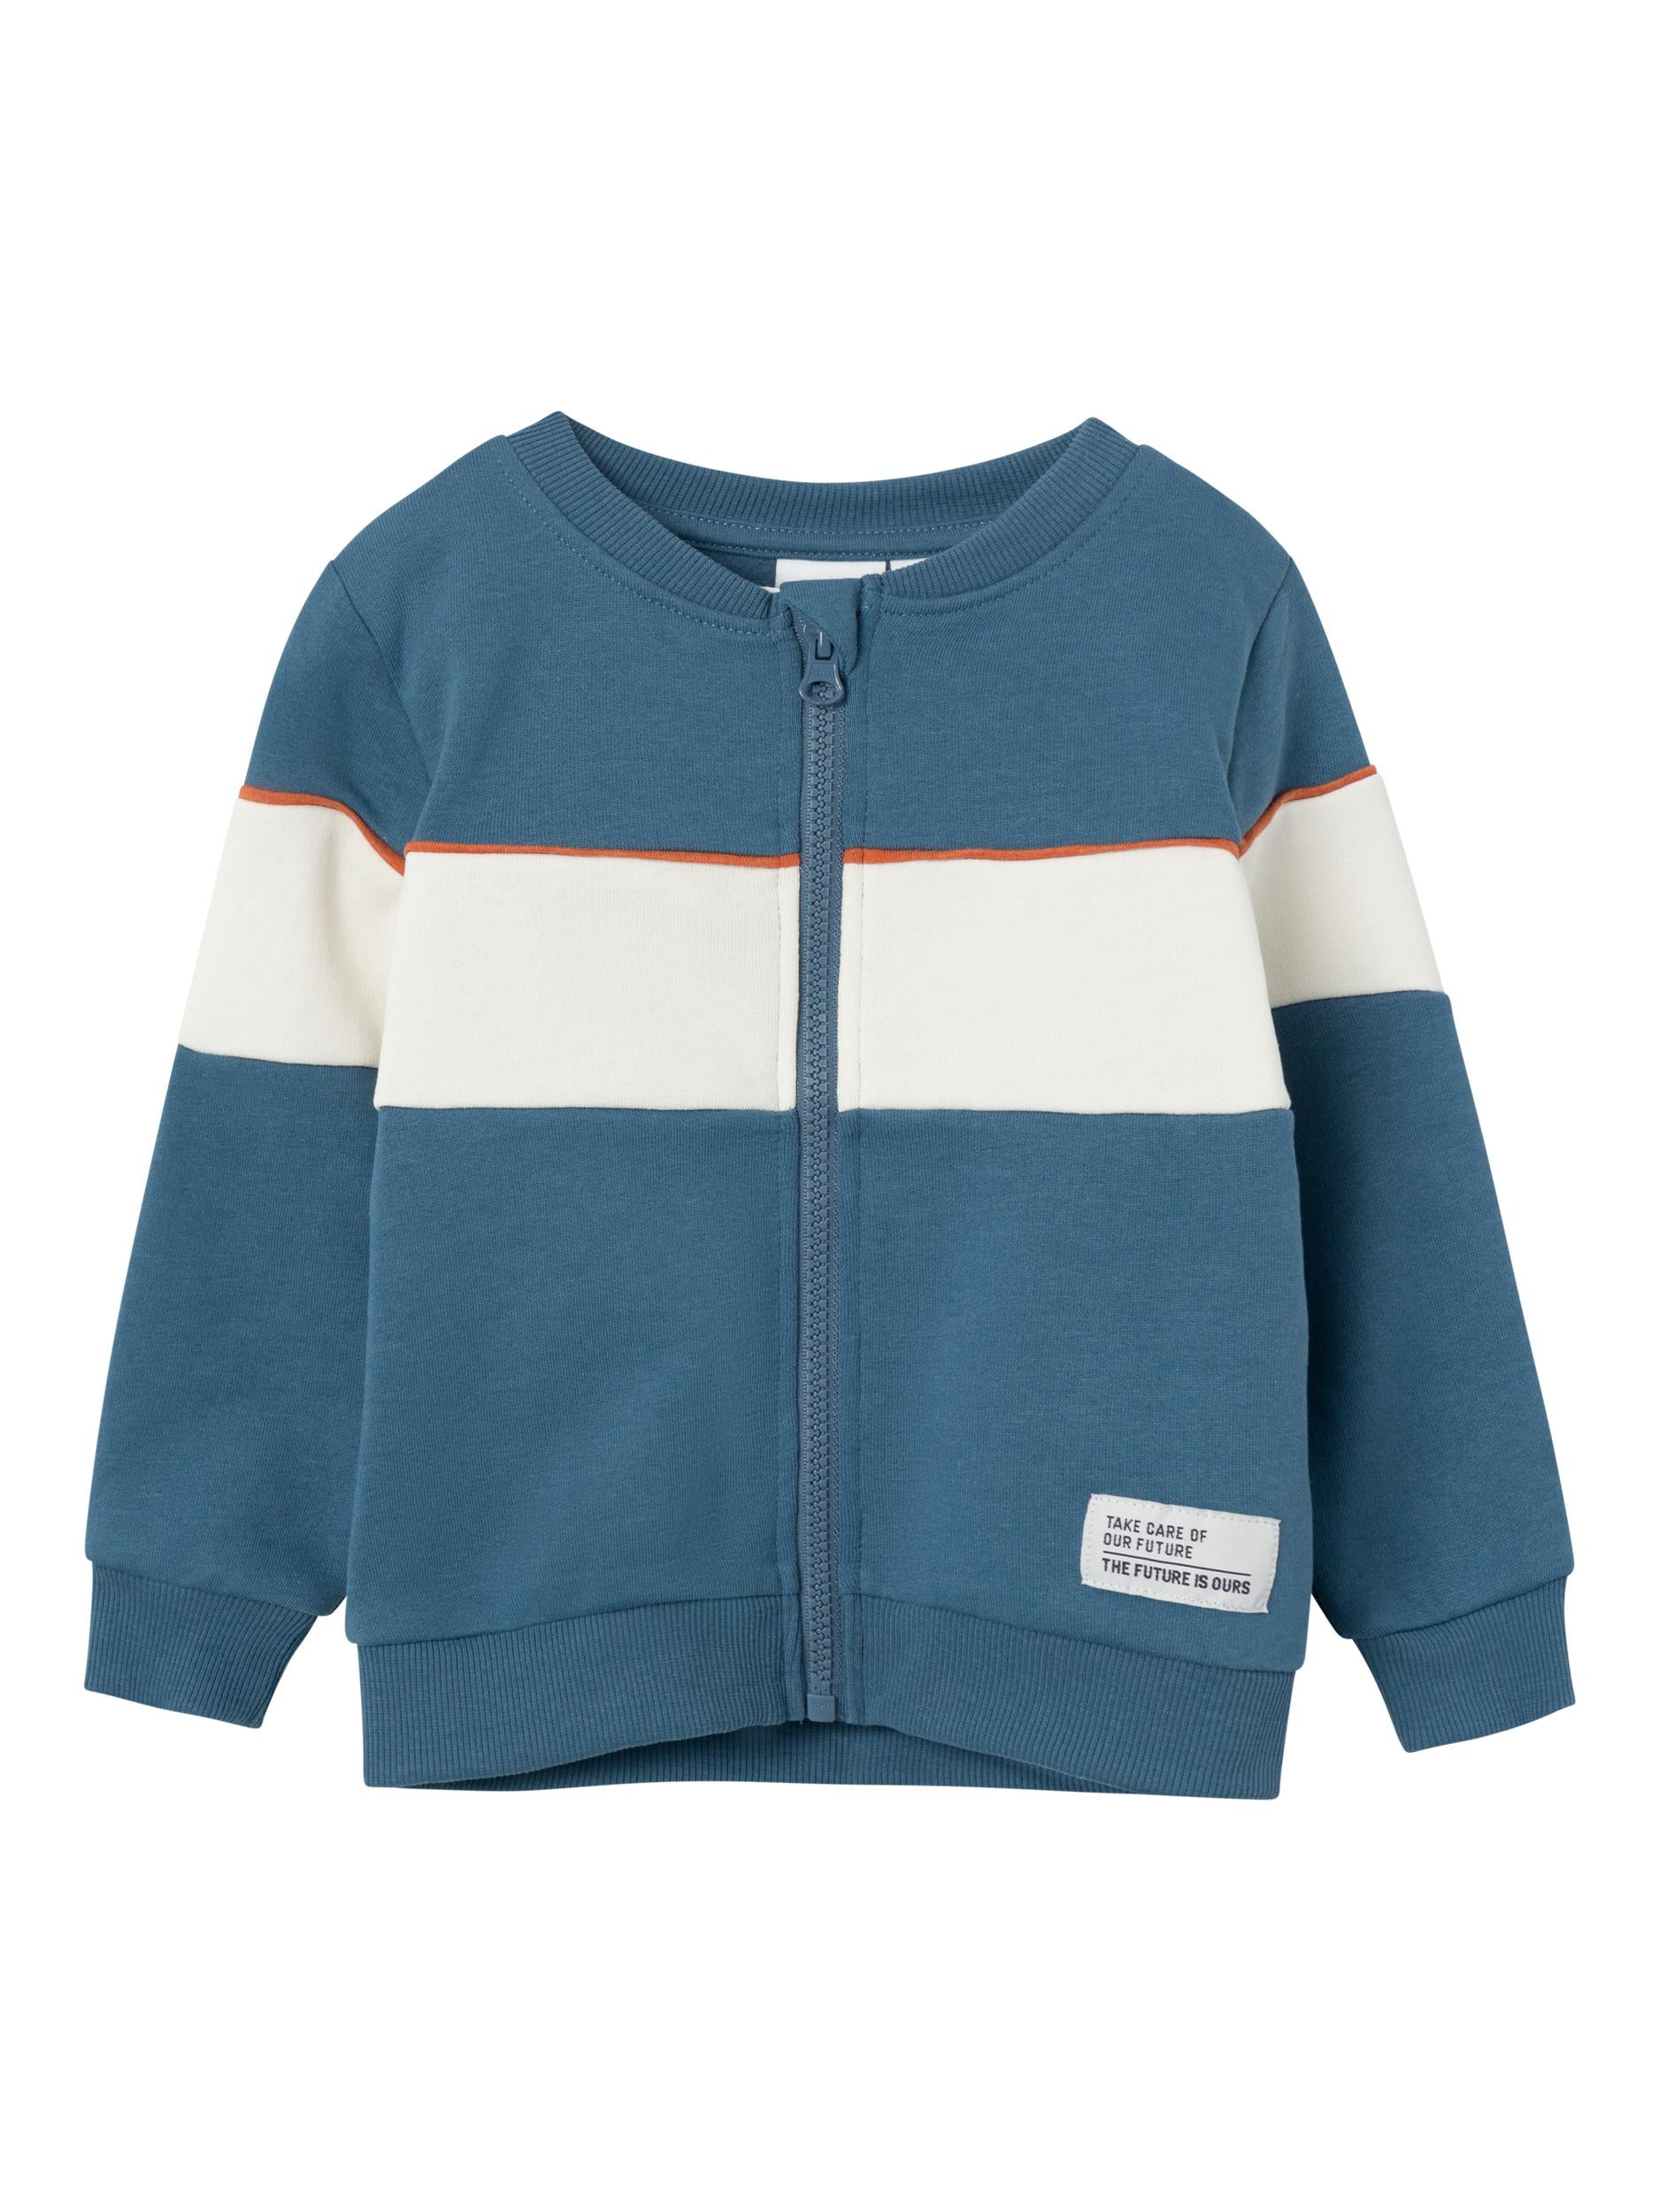 Boy's Nulle Sweat Cardigan-Bluefin-Front View